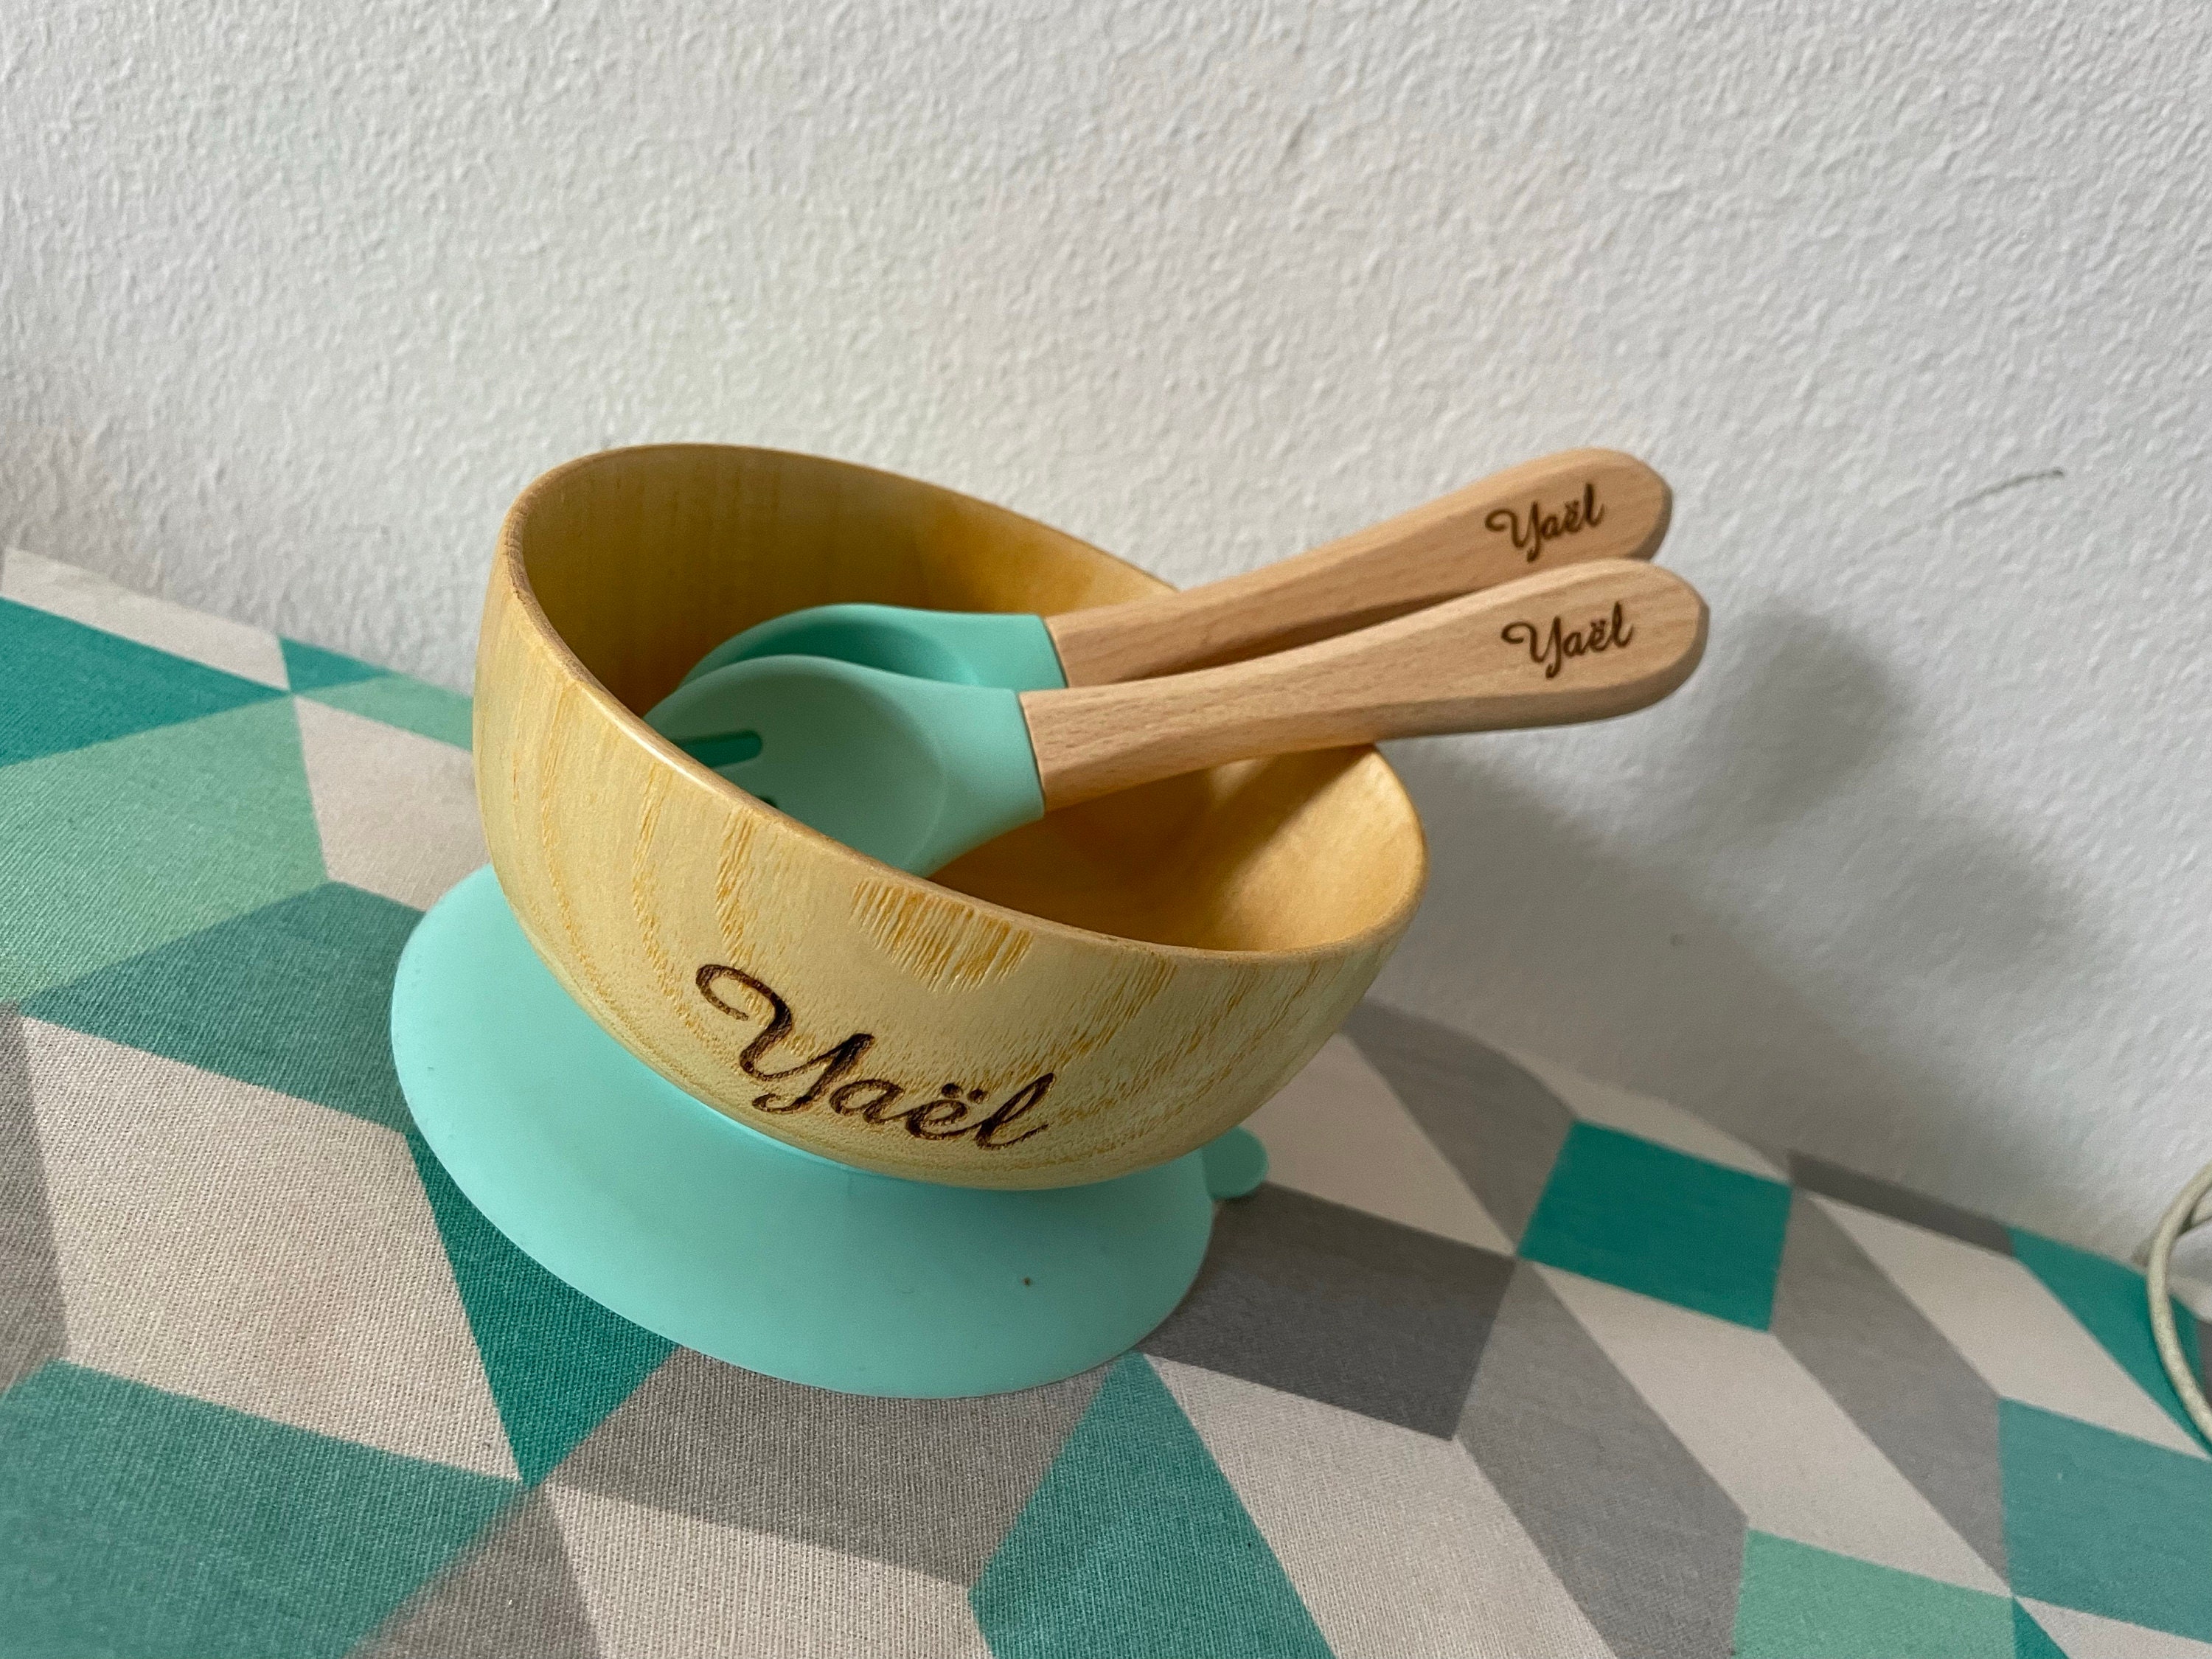 Personalized baby bowl and cutlery